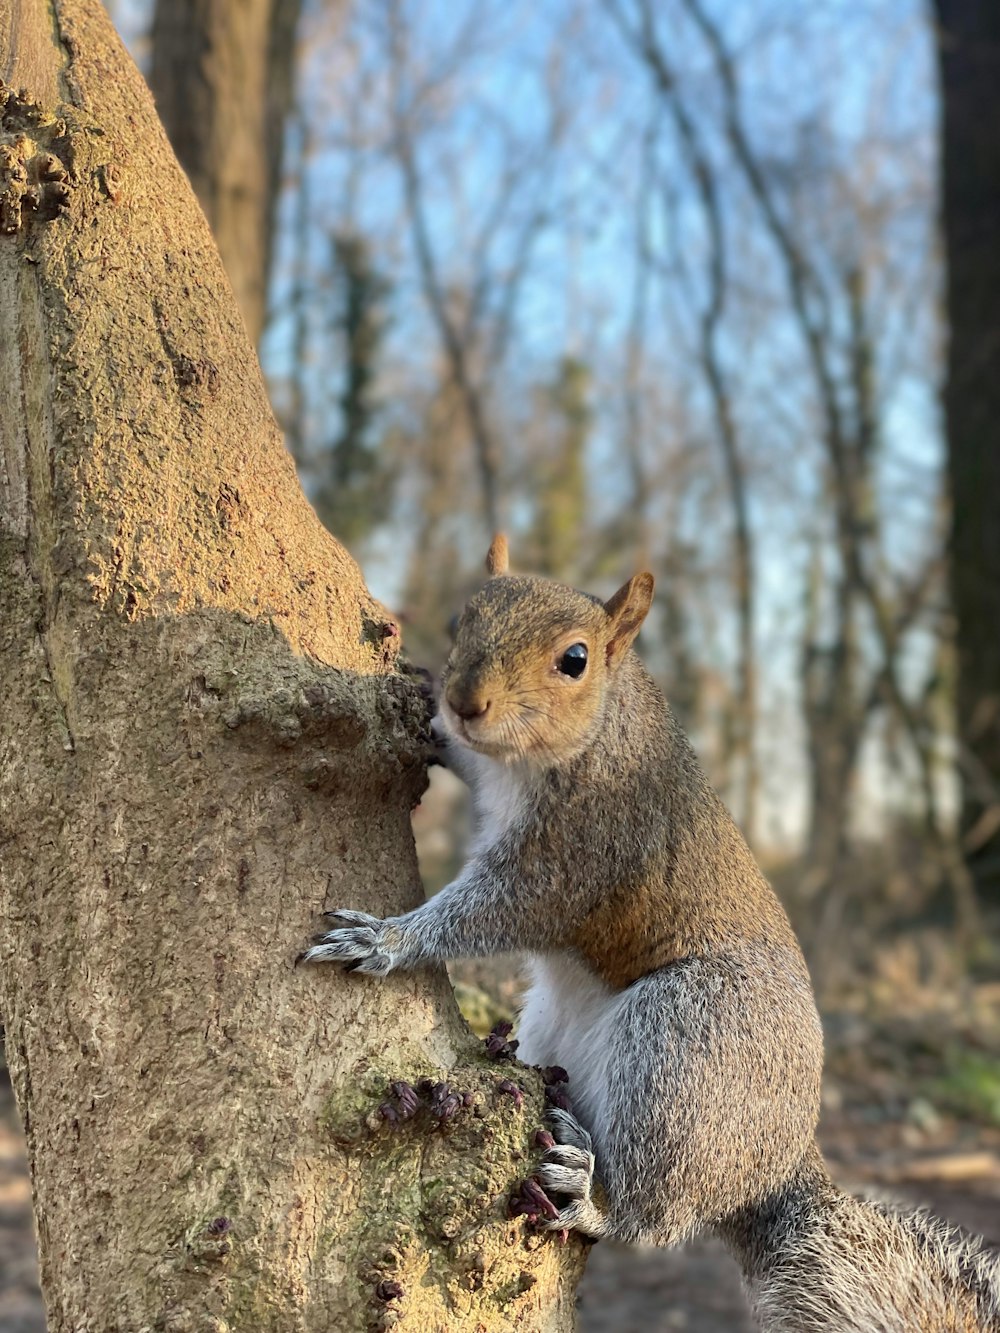 a squirrel is climbing up a tree trunk